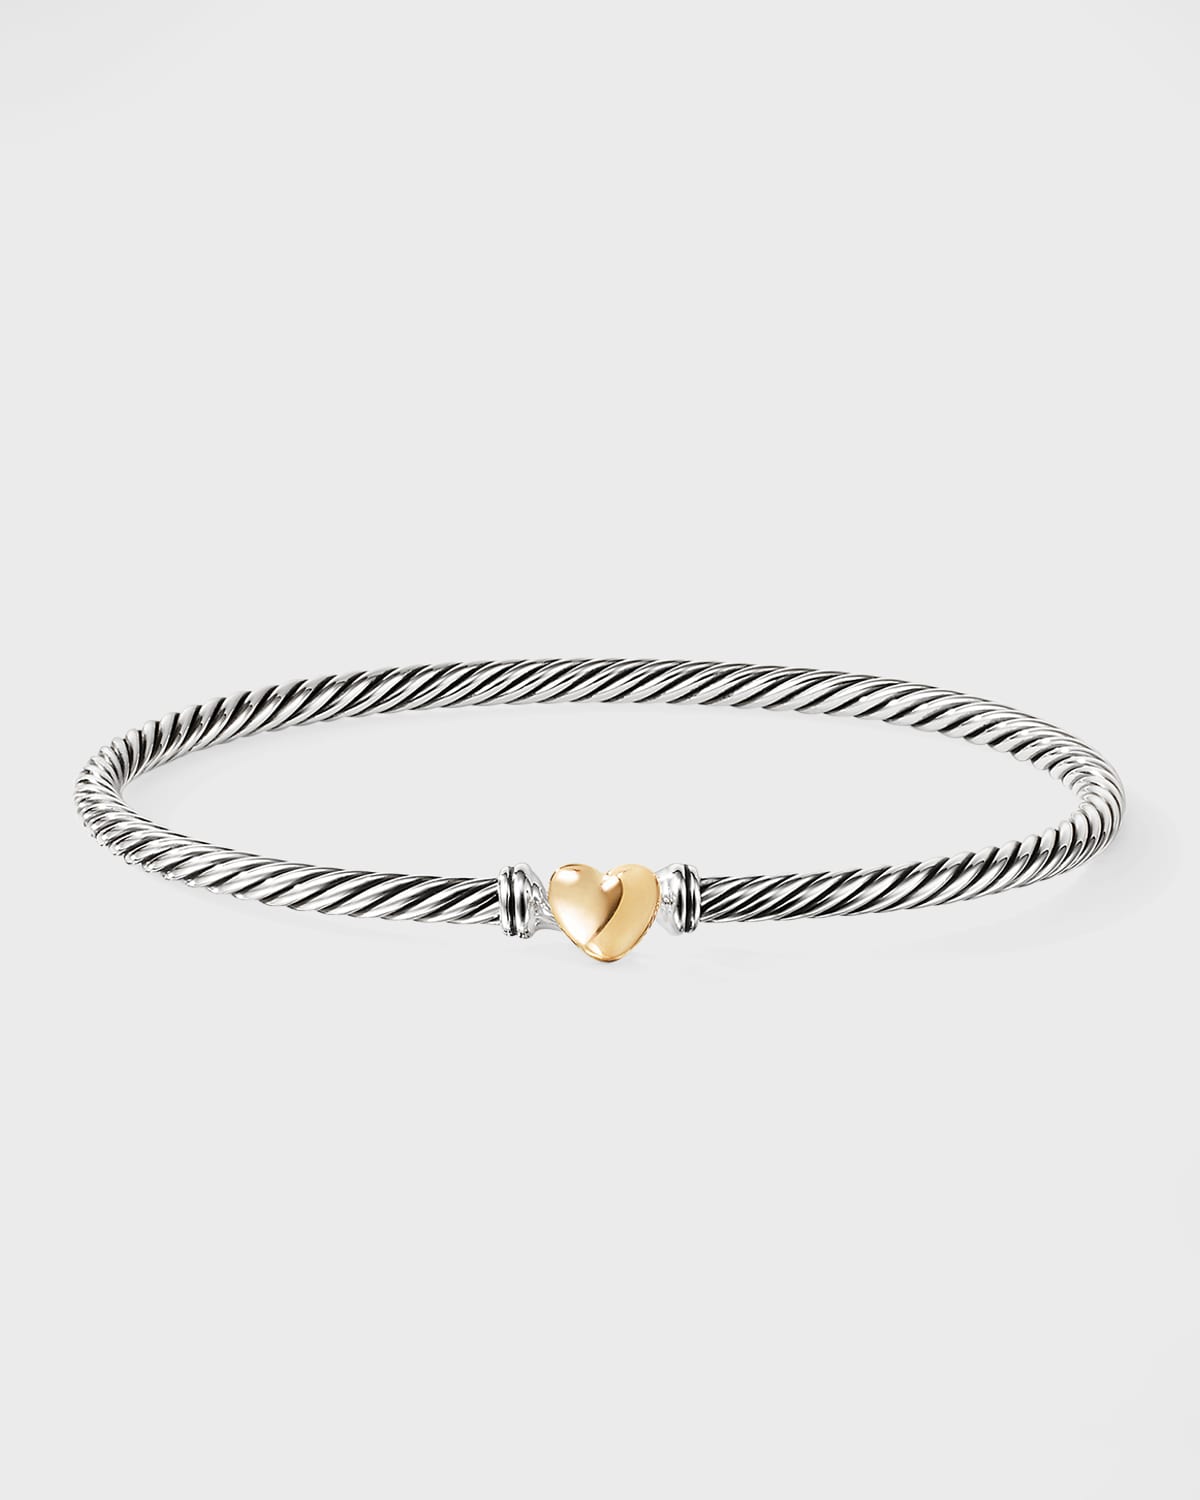 Cable Collectibles Heart Bracelet in Silver with 18K Gold, 3mm